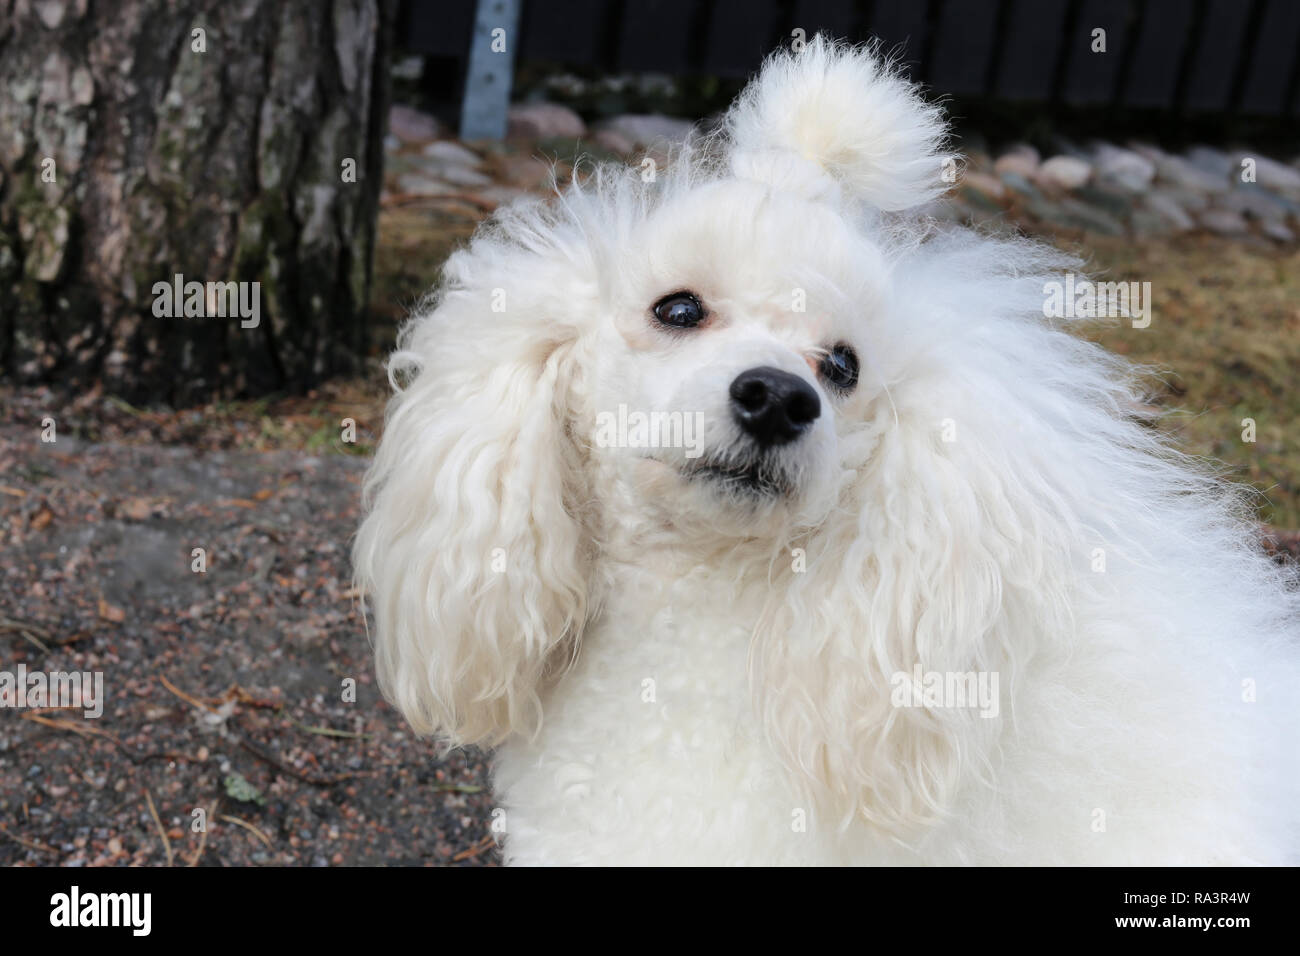 Portrait of my young white miniature poodle. This dog is super cute, furry and fluffy friend with white fur, black nose and black eyes. Stock Photo